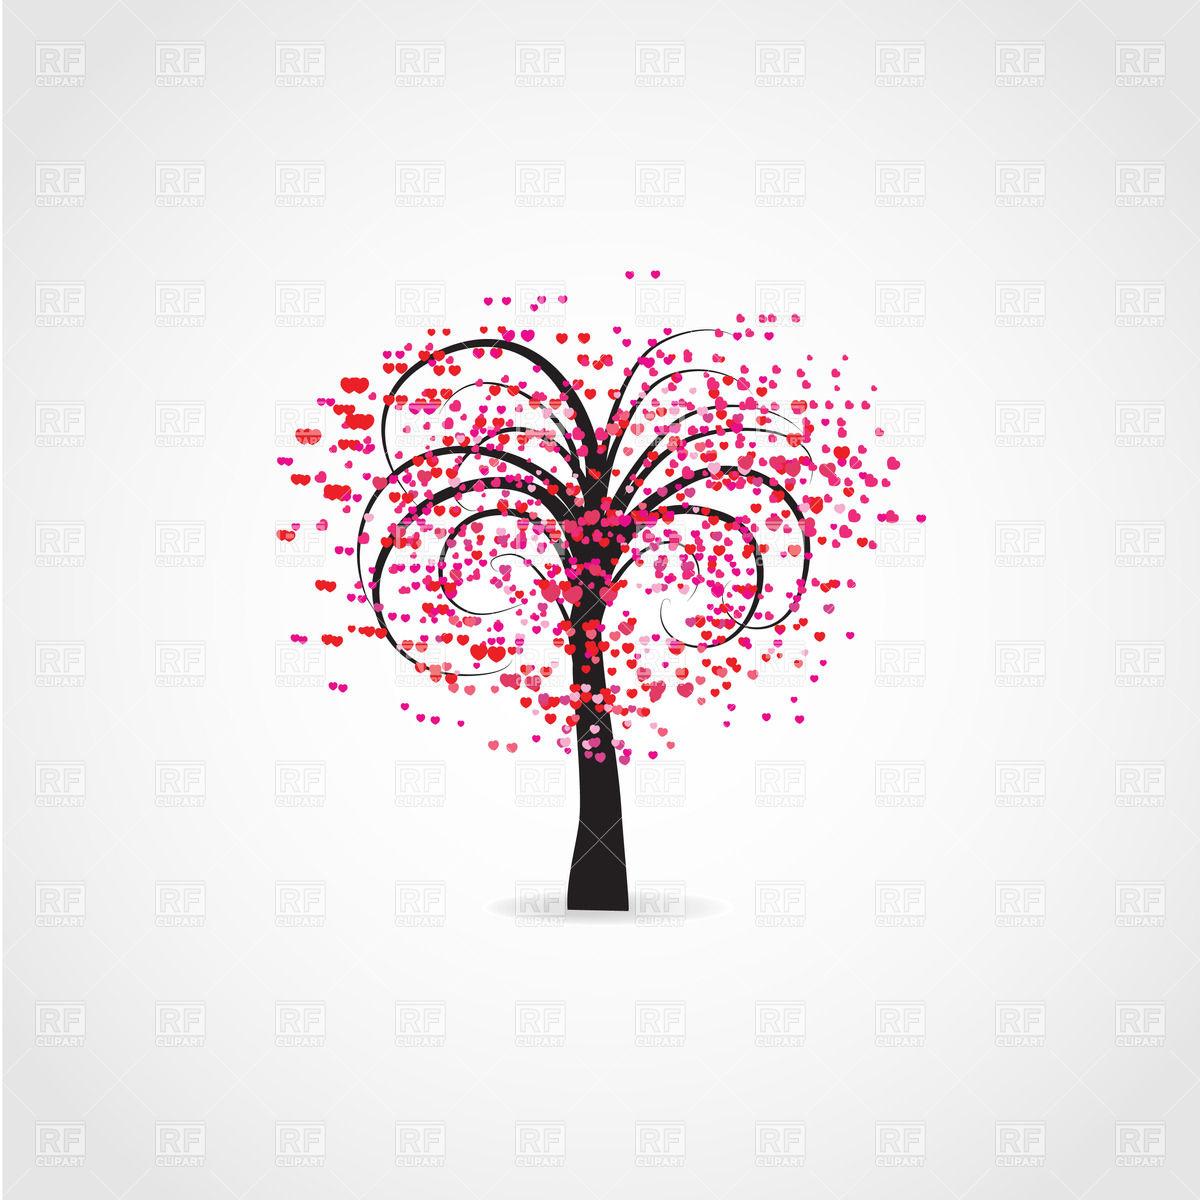 Stylized Vector Tree Covered With Heart Shaped Flowers 23088 Plants